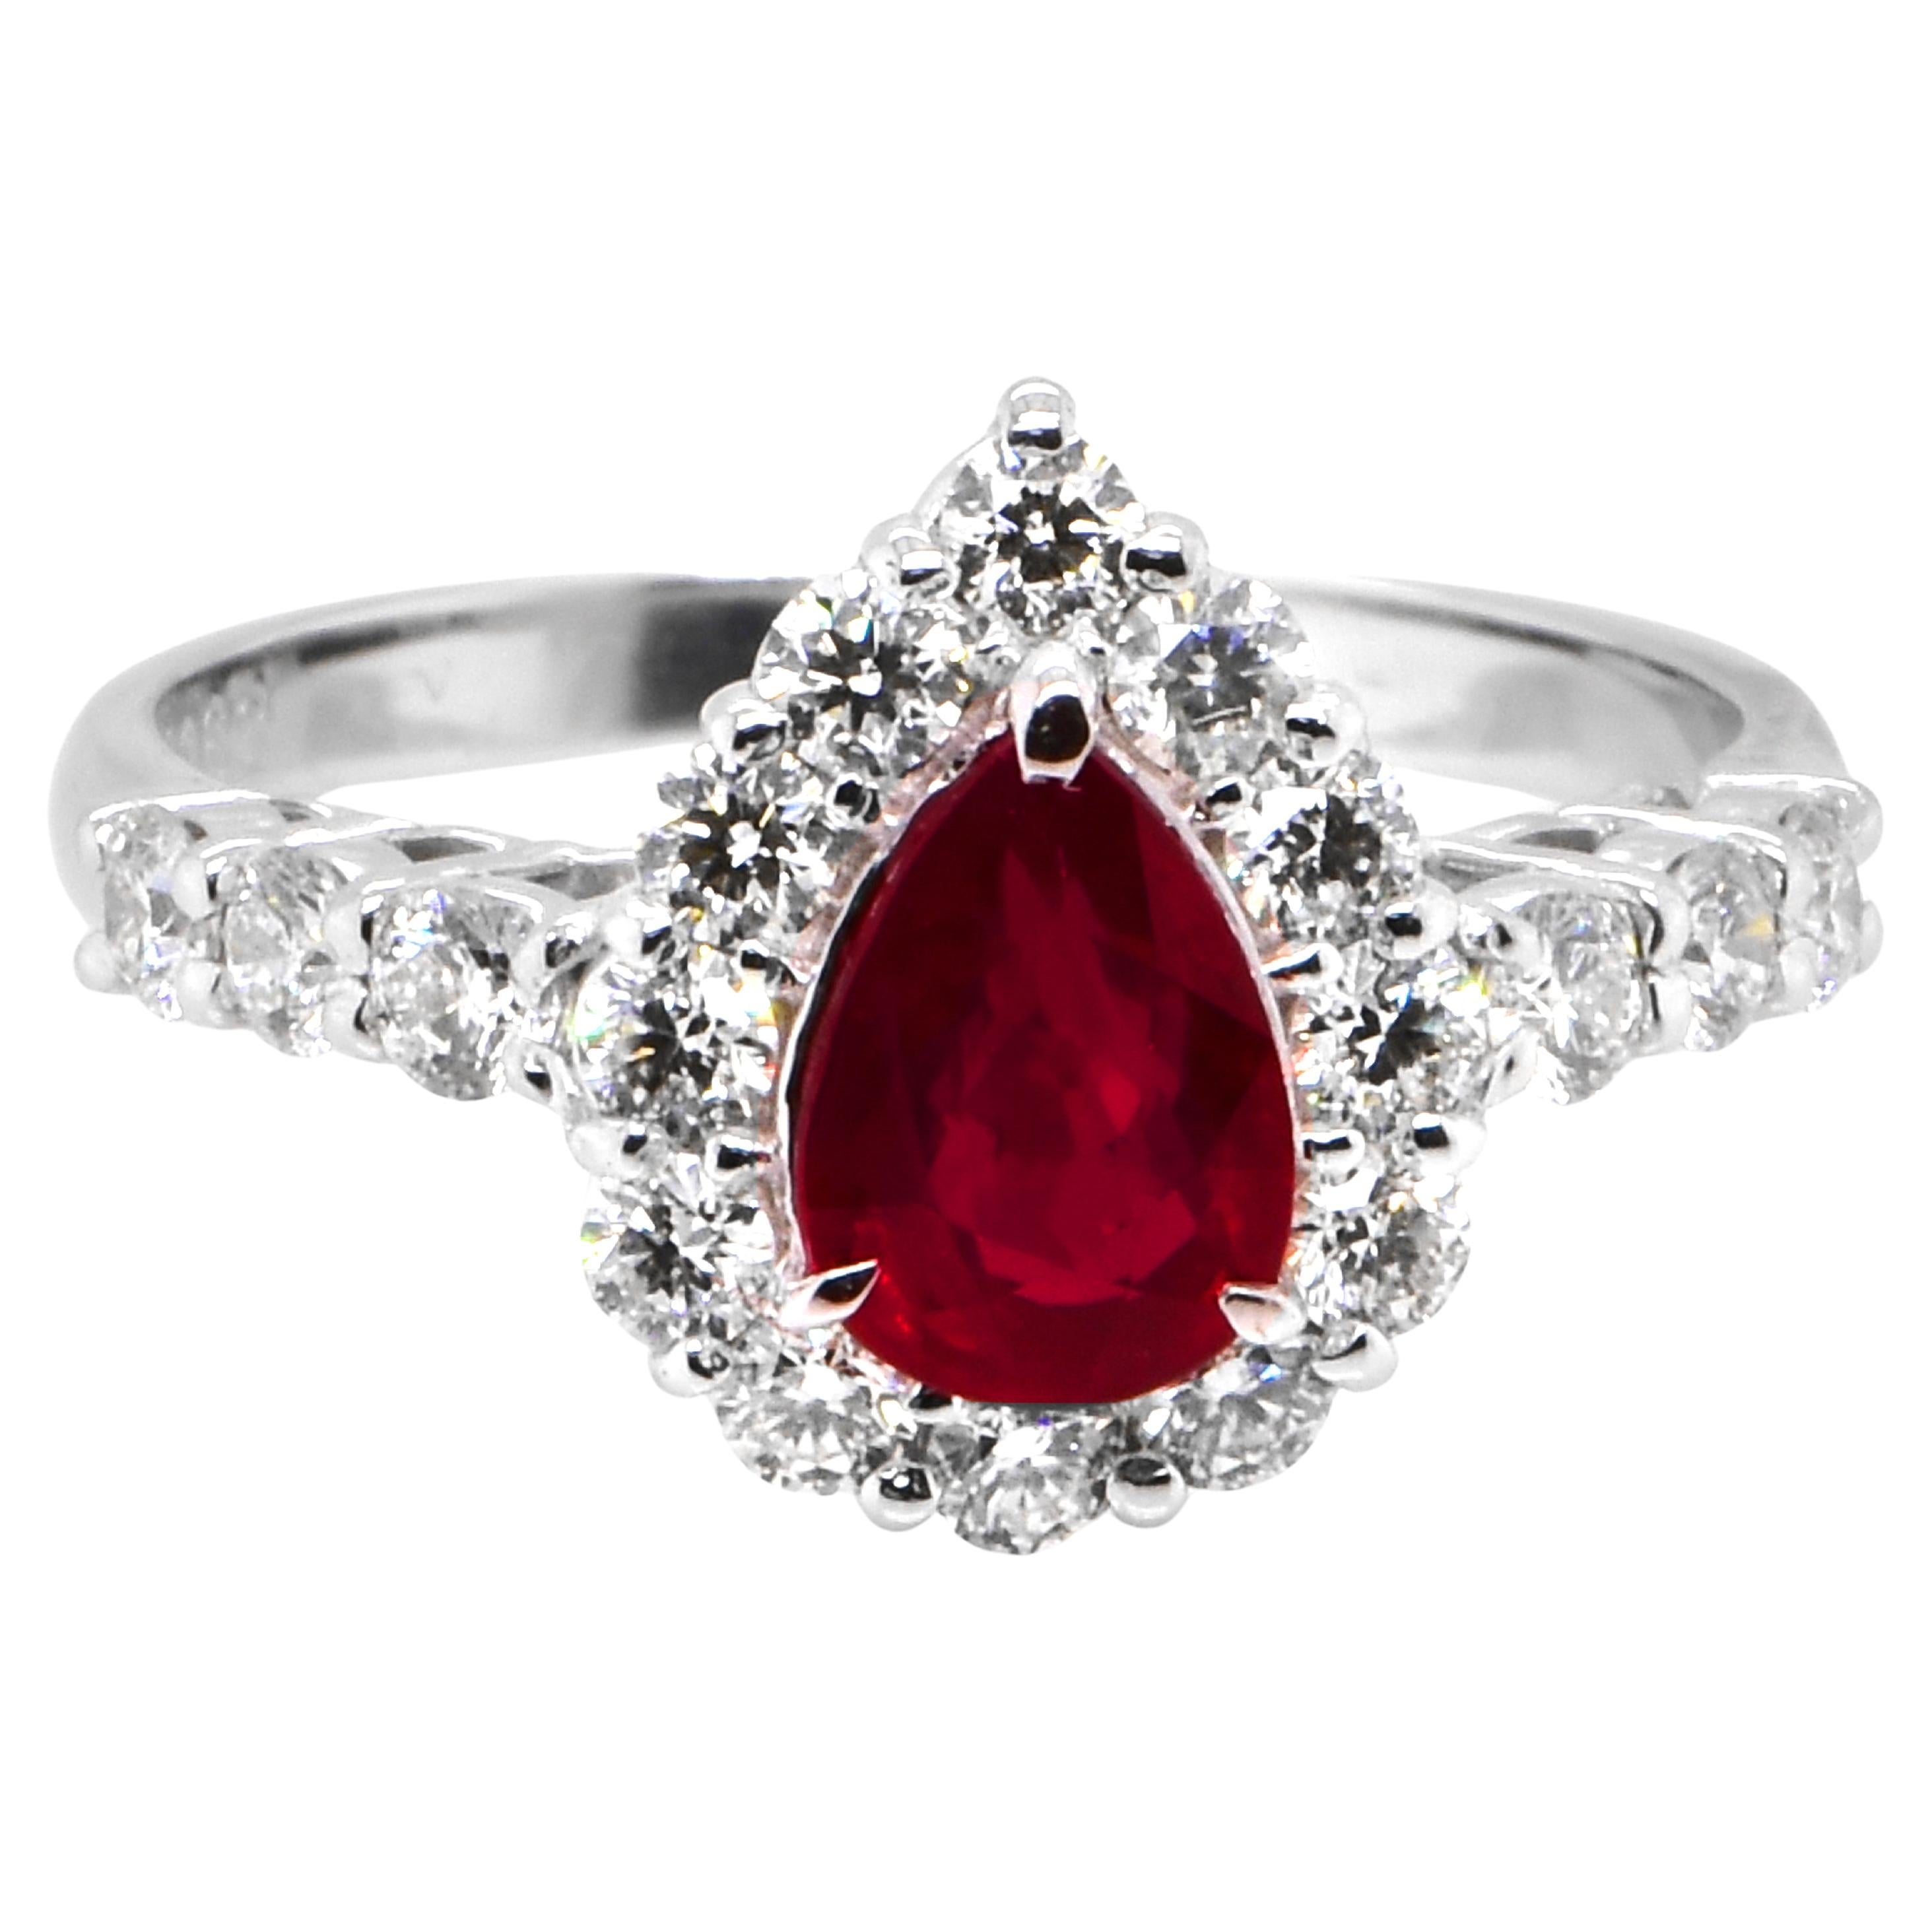 GIA Certified 1.03 Carat, Pigeon Blood Red, Burmese Ruby Ring Made in Platinum For Sale